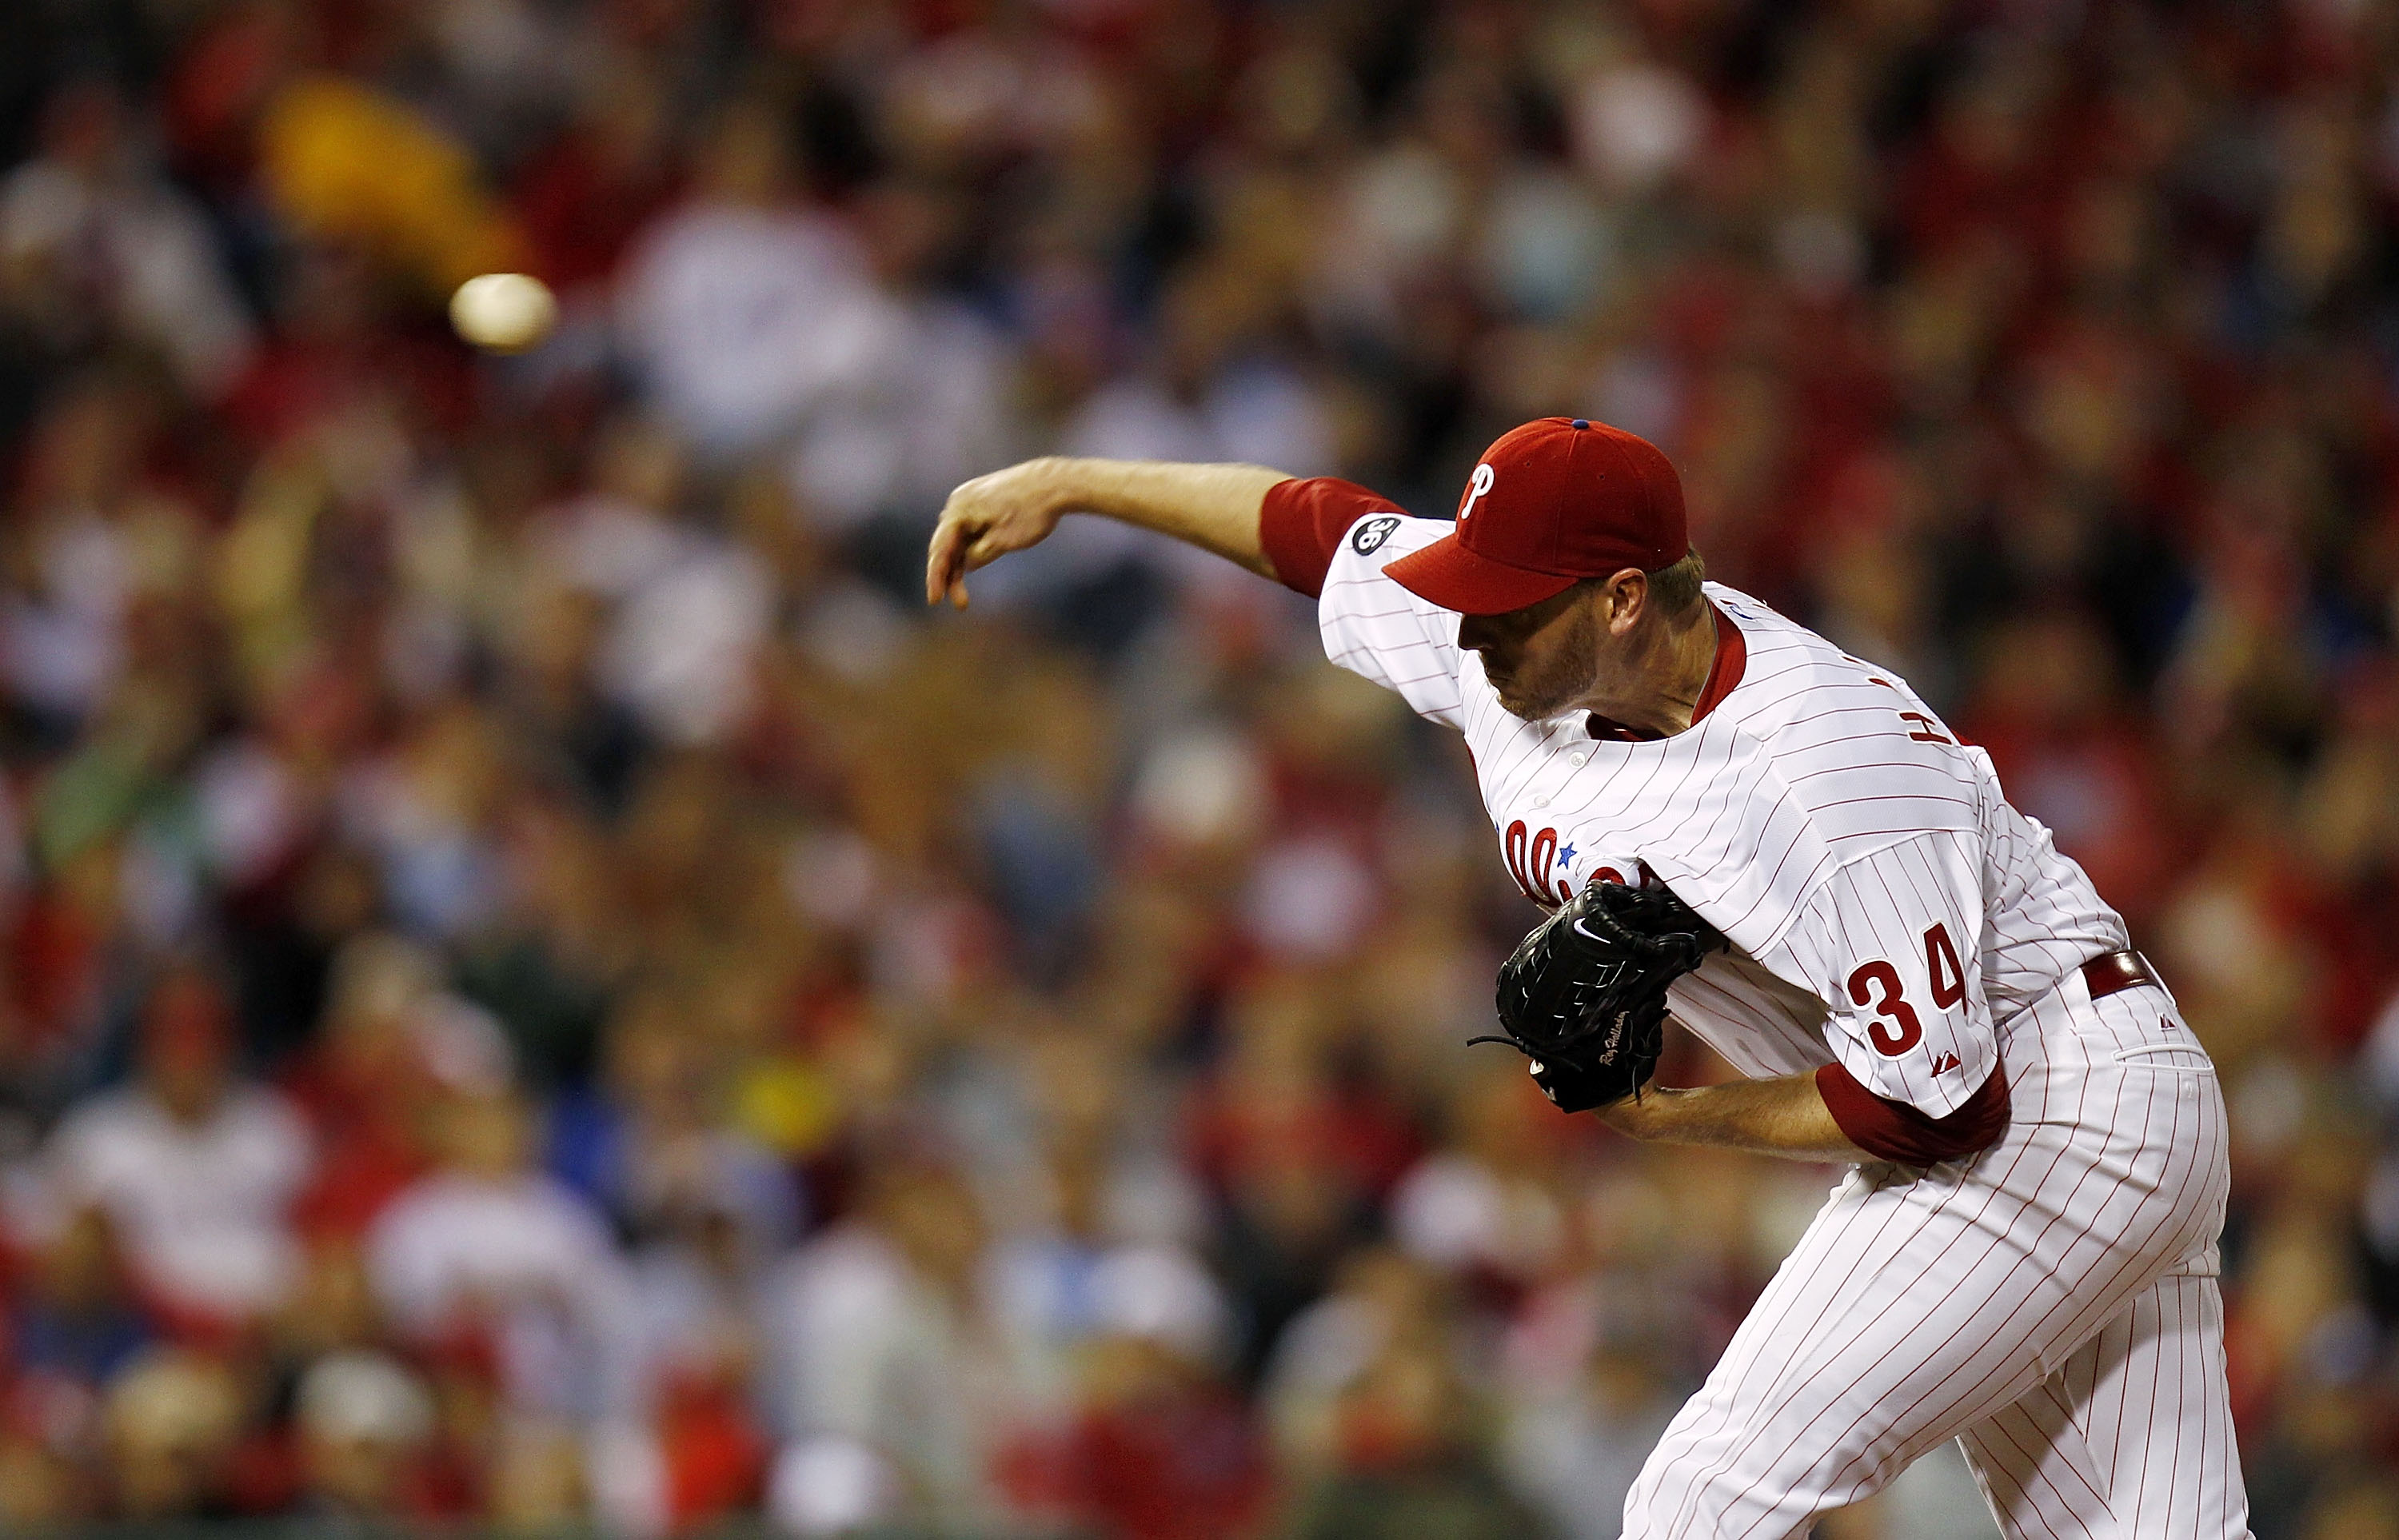 Roy Halladay tosses one-hit, complete game shutout against Yankees